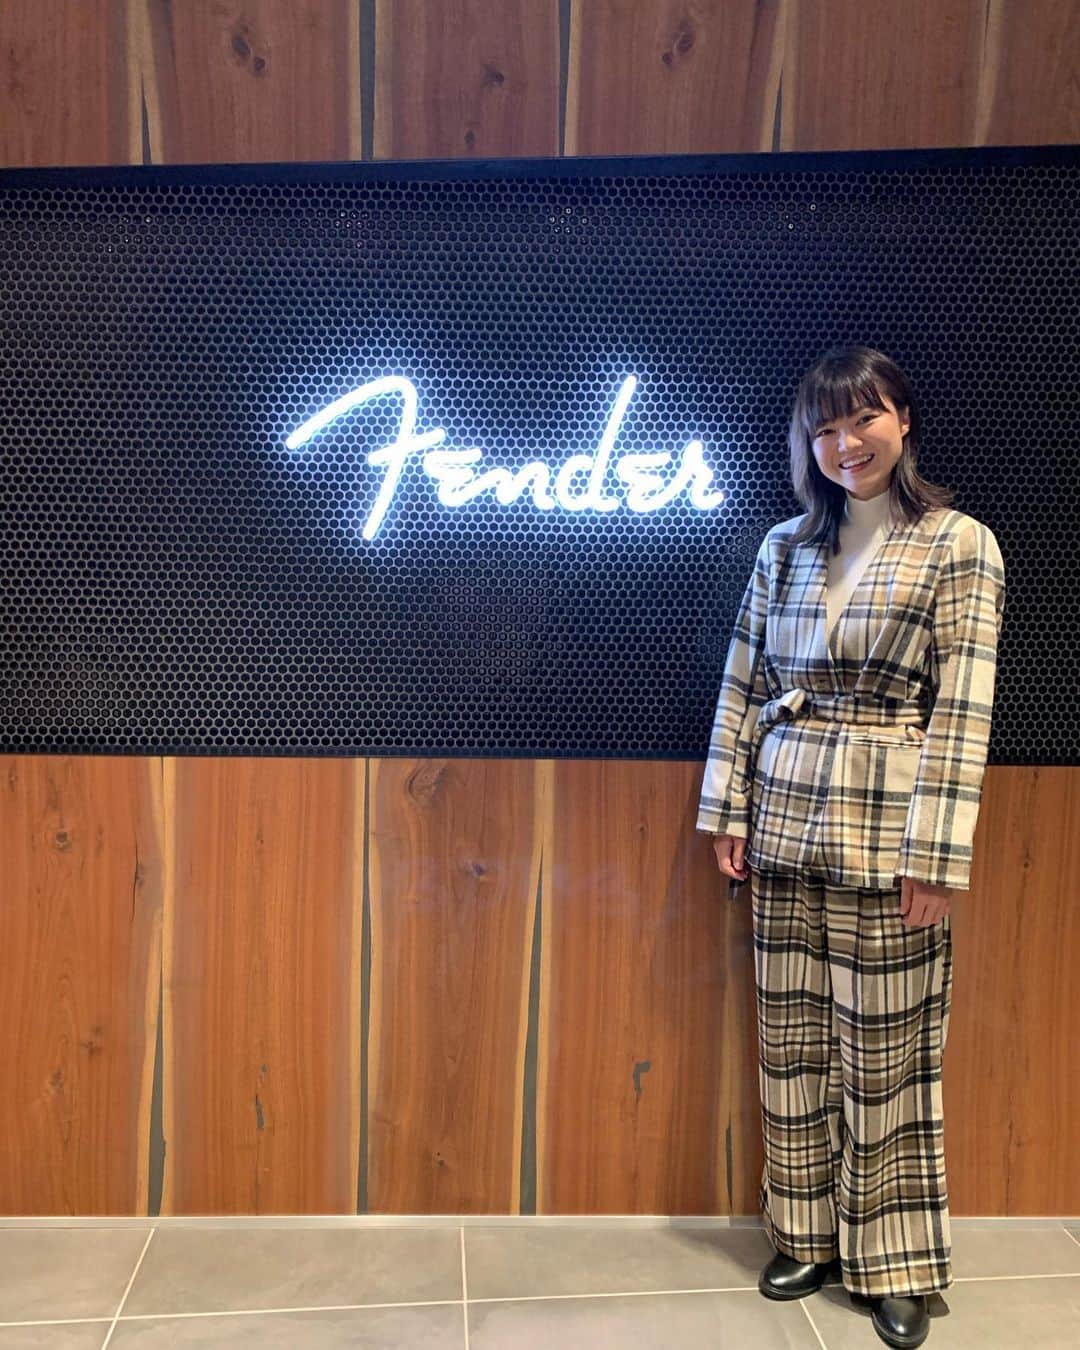 弓木英梨乃さんのインスタグラム写真 - (弓木英梨乃Instagram)「✨ I am delighted to announce that I have signed an endorsement agreement with Fender! I am truly honored to be one of the Fender Artists I have always admired. The Fender my father lent me when I first started playing guitar, the Fender I played when I debuted as a singer-songwriter, the Fender I played in KIRINJI where I spent most of my 20s, the Fender I sounded in stadiums and arenas as a support guitarist, the Fender I shared my time studying abroad with... Fender guitars have filled my life as a guitarist with colour for all these years. Fender guitars not only bring out the best in me, but also make me realize new possibilities beyond that. Especially in recent years, I believe that finding the American Ultra Stratocaster® in 2020 has opened a new door for me. Fender guitars have always made me feel fresh and enthusiastic, like when I first started playing guitar. I am still in the process of developing myself, but I want to continue to grow and enjoy playing guitar with my Fenders, which always give me the courage to take on new challenges!  この度、わたし弓木英梨乃はフェンダーとエンドースメント契約を結びました！憧れのフェンダーアーティストの一員になれることを心から光栄に思います。ギターを始めたばかりの頃弾いていた父のフェンダー、シンガーソングライターとしてデビューした頃に弾いていたフェンダー、20代のほとんどを過ごしたKIRINJIで弾いていたフェンダー、サポートギタリストとしてスタジアムやアリーナで鳴らしたフェンダー、海外での留学生活を共にしたフェンダー… フェンダーのギターは今日までのわたしのギタリストとしての人生を彩ってきてくれました。フェンダーのギターは自分が今持っている力を最大限に引き出してくれるだけにとどまらず、それを超えた新たな可能性に気づかせてくれます。特に近年では、2020年にAmerican Ultra Stratocaster®に出会えたことが自分の新しい扉を開いてくれたと感じています。フェンダーのギターは、いつもわたしをギターを始めたばかりの頃のような新鮮で無我夢中な気持ちにさせてくれます。まだまだ発展途中のわたしですが、チャレンジする勇気をいつも与えてくれるフェンダーのギターと共に成長し続け、楽しくギターを弾き続けていきたいです。」1月23日 20時28分 - erino_yumiki